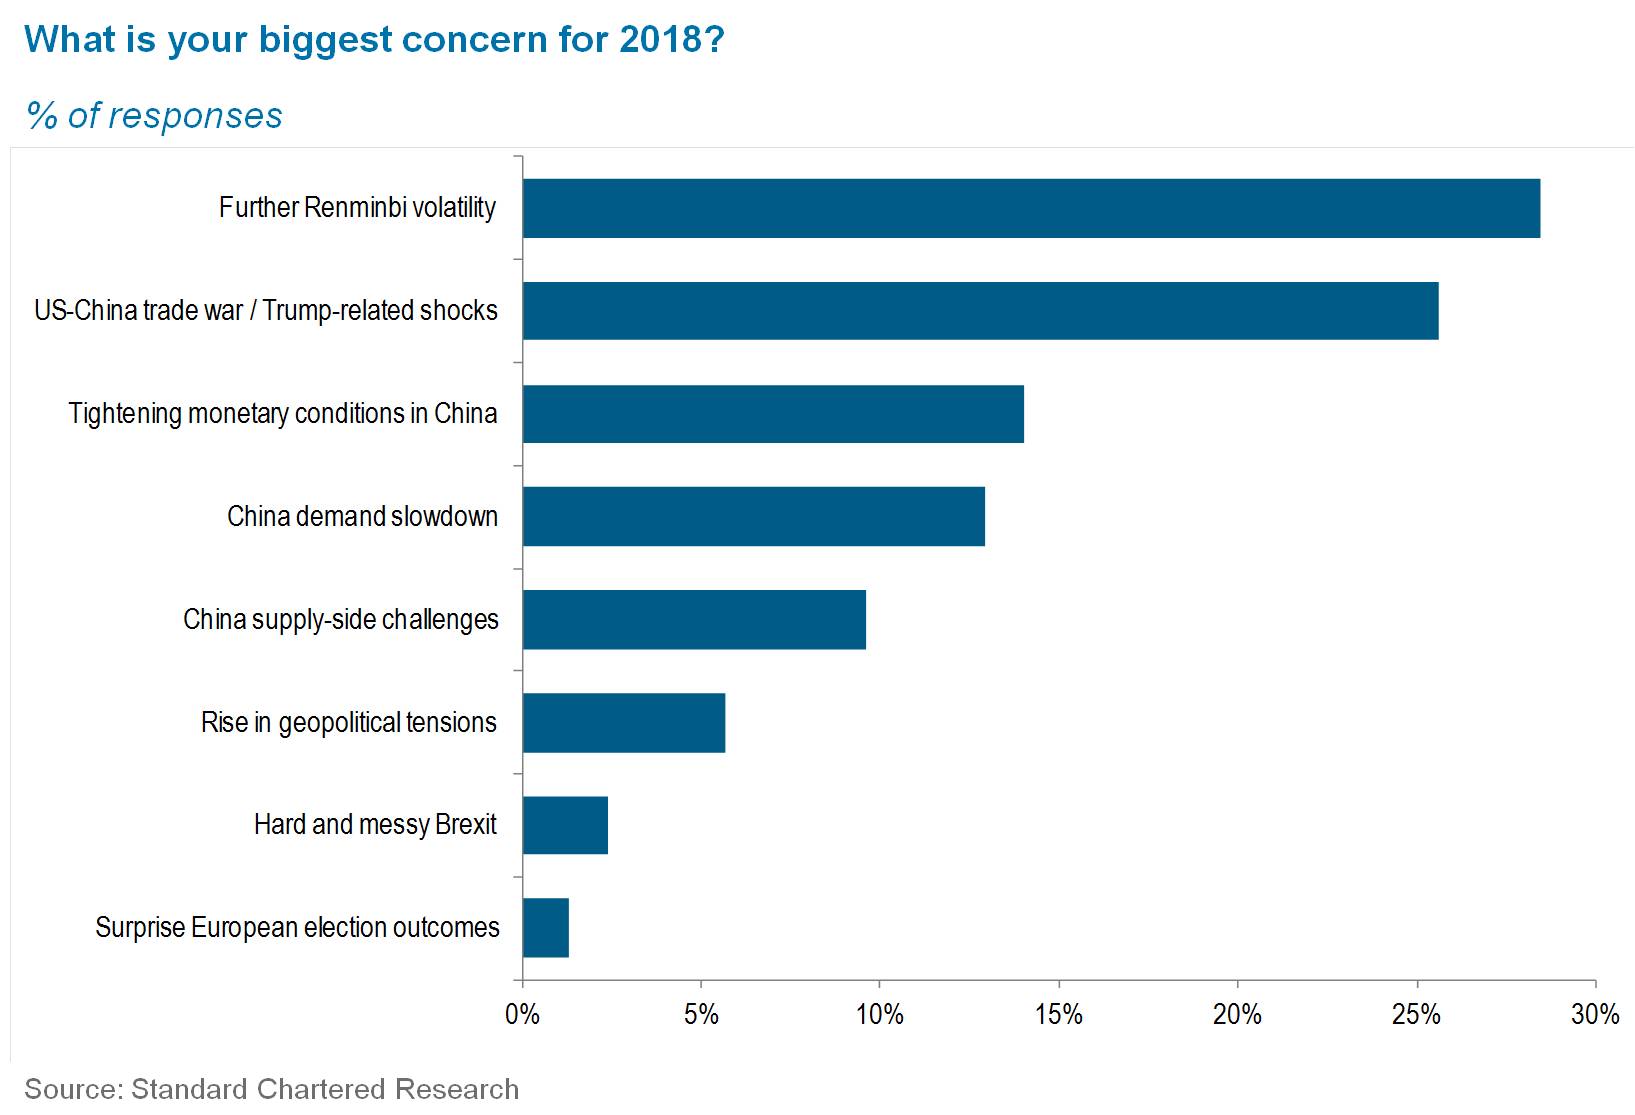 China manufacturers' biggest concerns for 2018